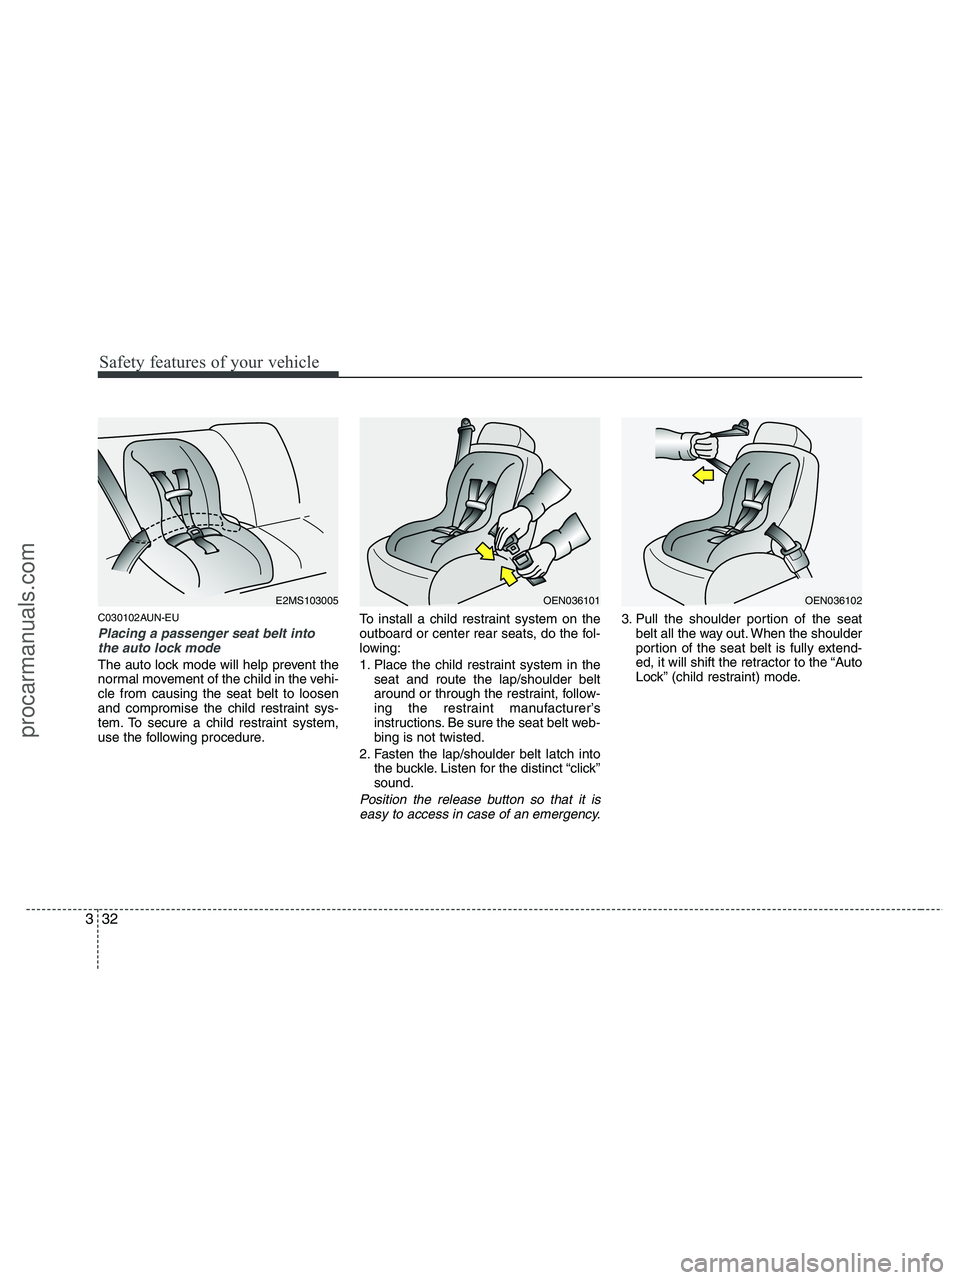 HYUNDAI VERACRUZ 2010 Workshop Manual Safety features of your vehicle
32 3
C030102AUN-EU
Placing a passenger seat belt into
the auto lock mode 
The auto lock mode will help prevent the
normal movement of the child in the vehi-
cle from ca